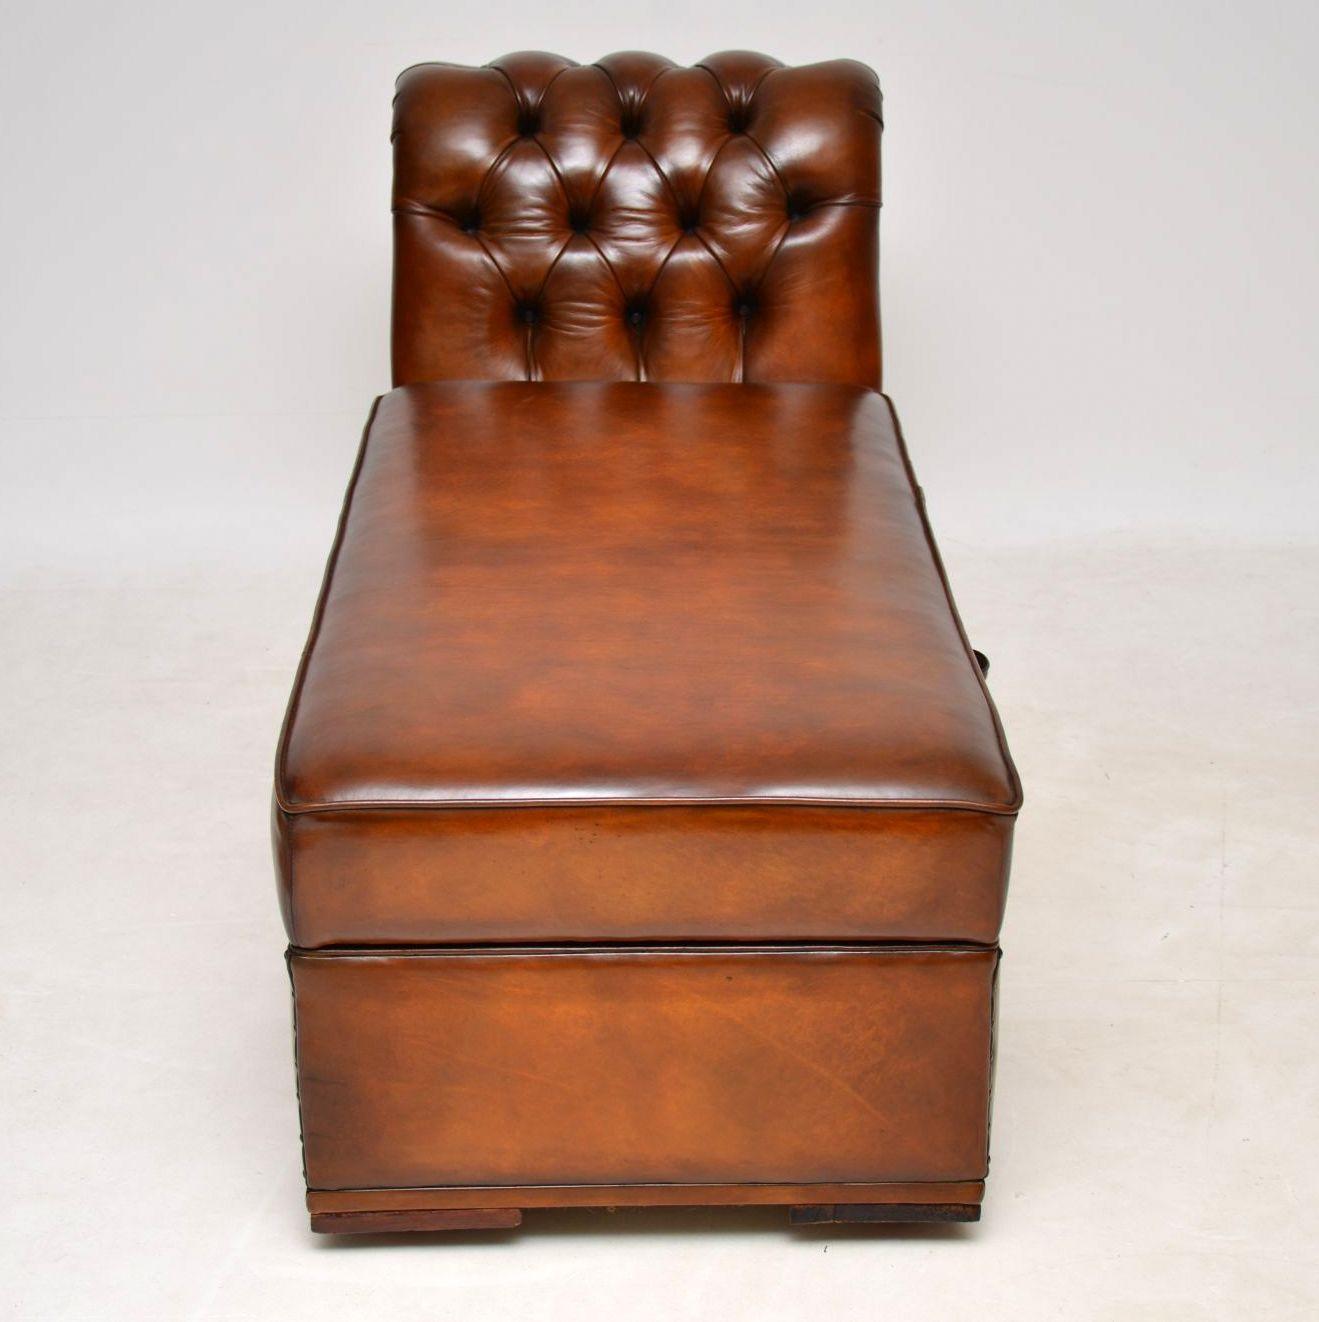 Late 19th Century  Antique Victorian Leather Chaise Lounge Ottoman